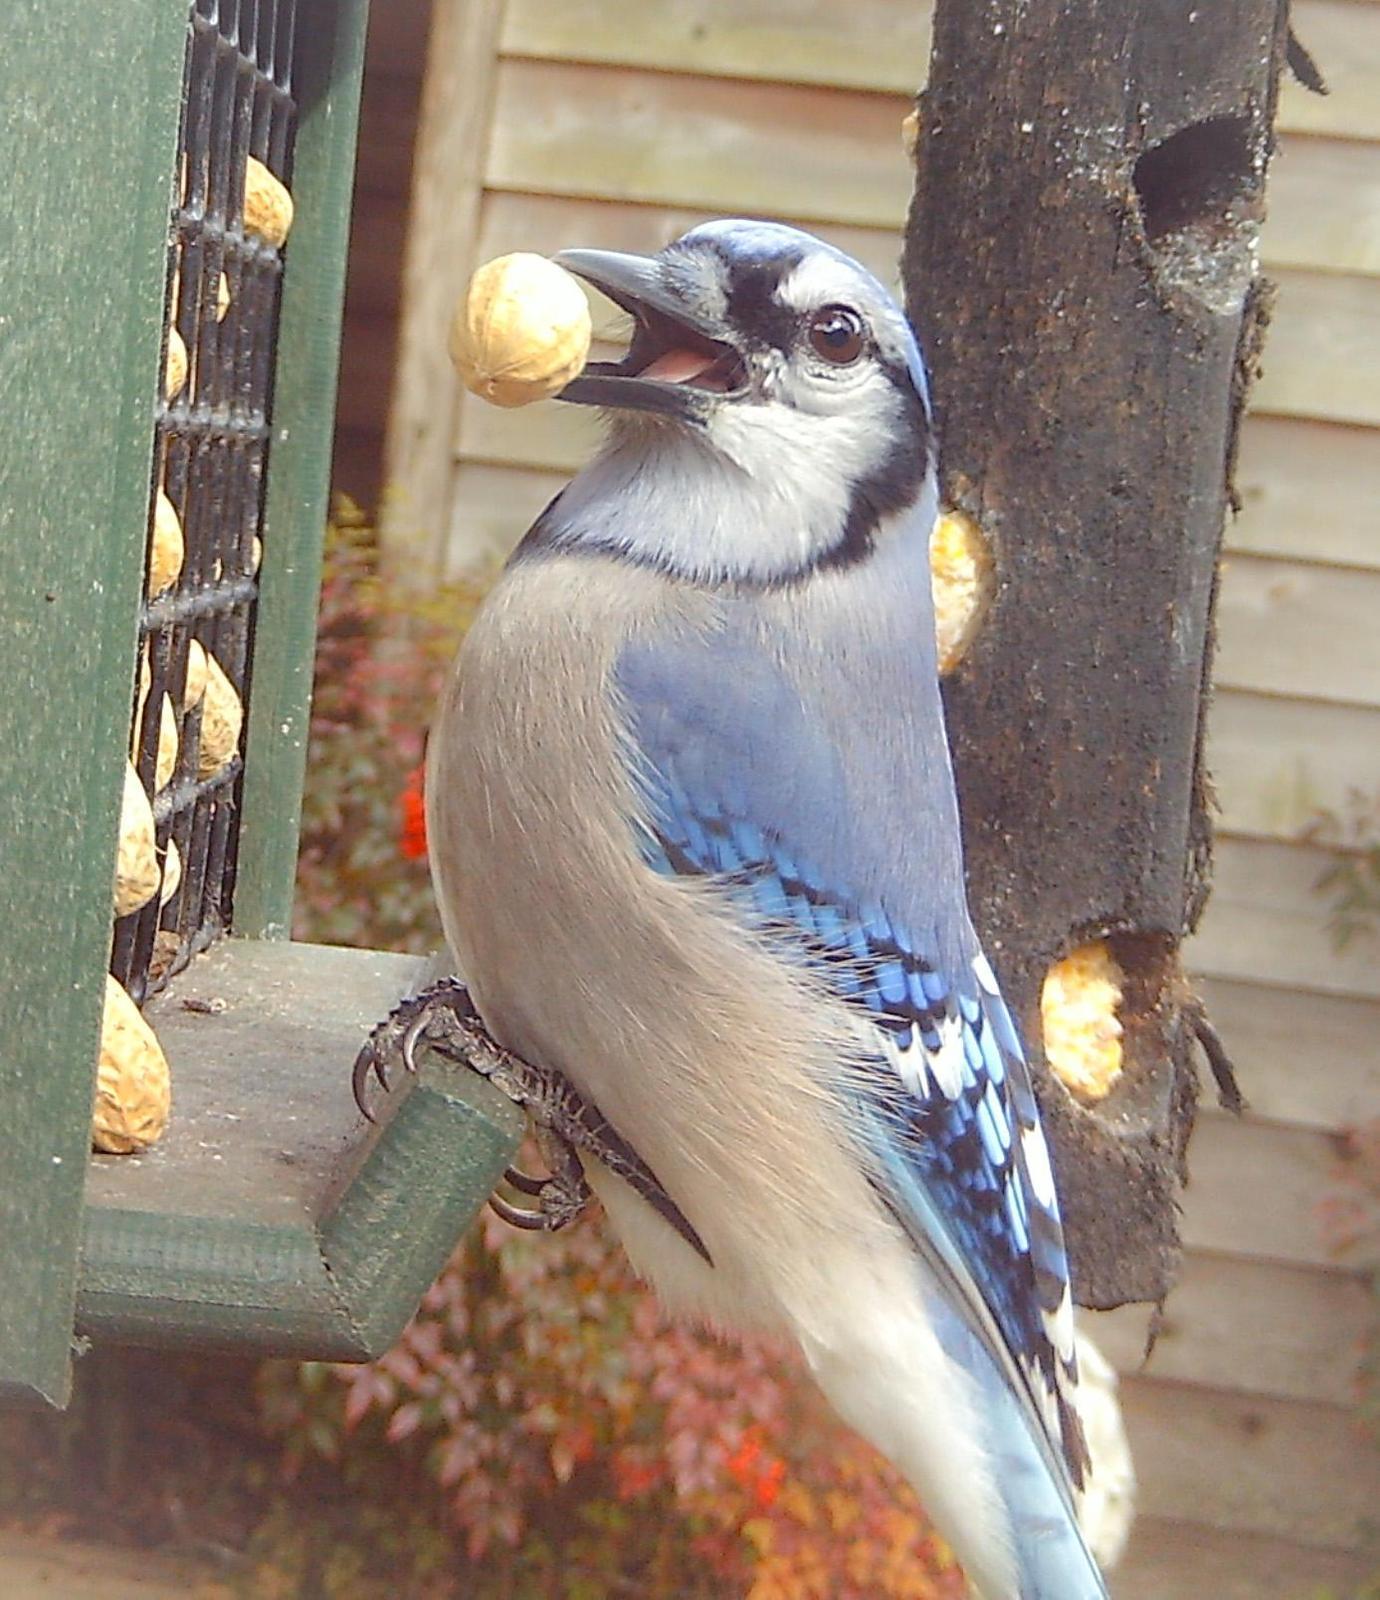 Blue Jay Photo by Mike Ballentine